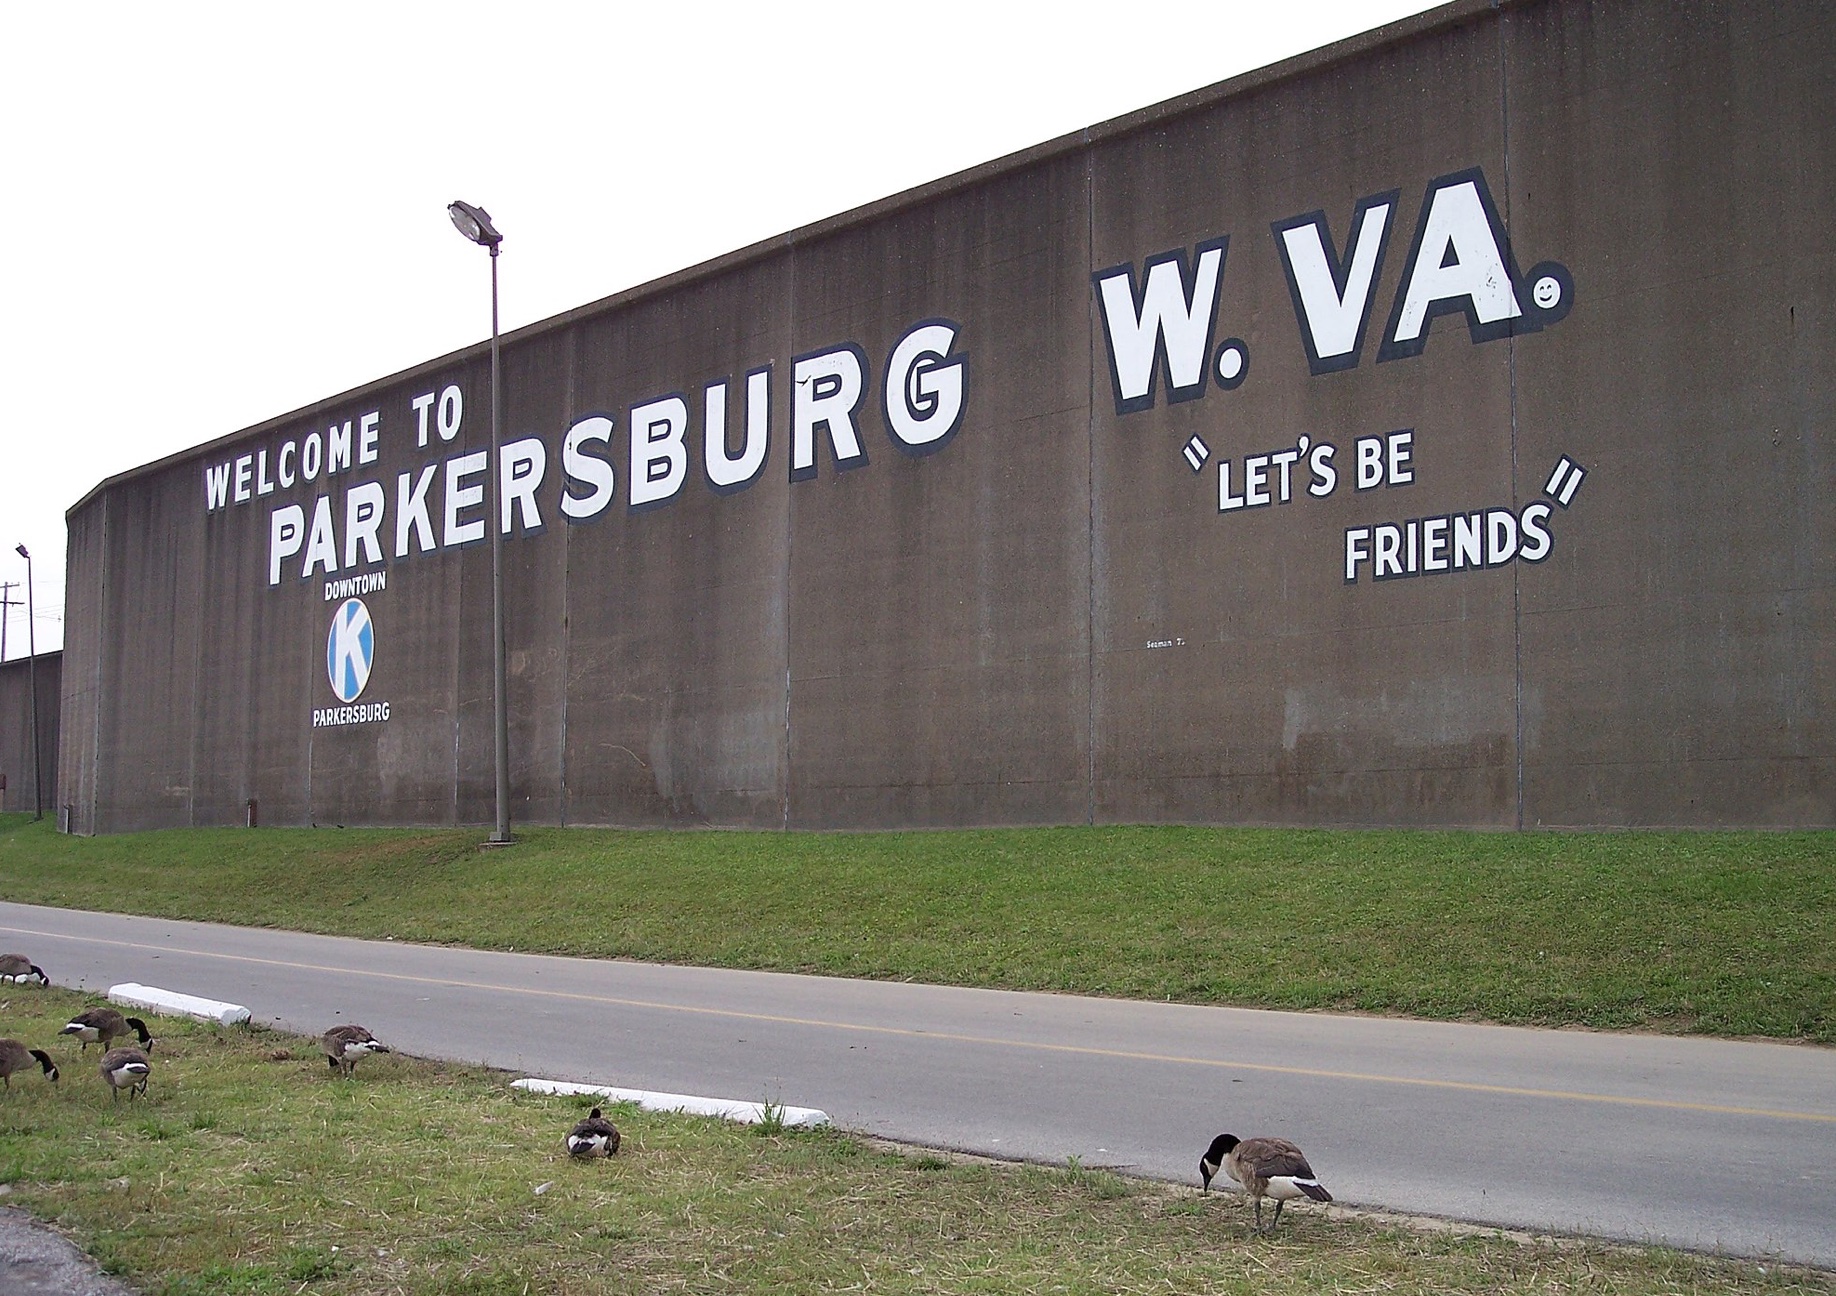 Welcome to Parkersburg, WV sign; image by Tim Kiser, with User Malepheasant, CC BY-SA 2.5, via Wikimedia Commons.